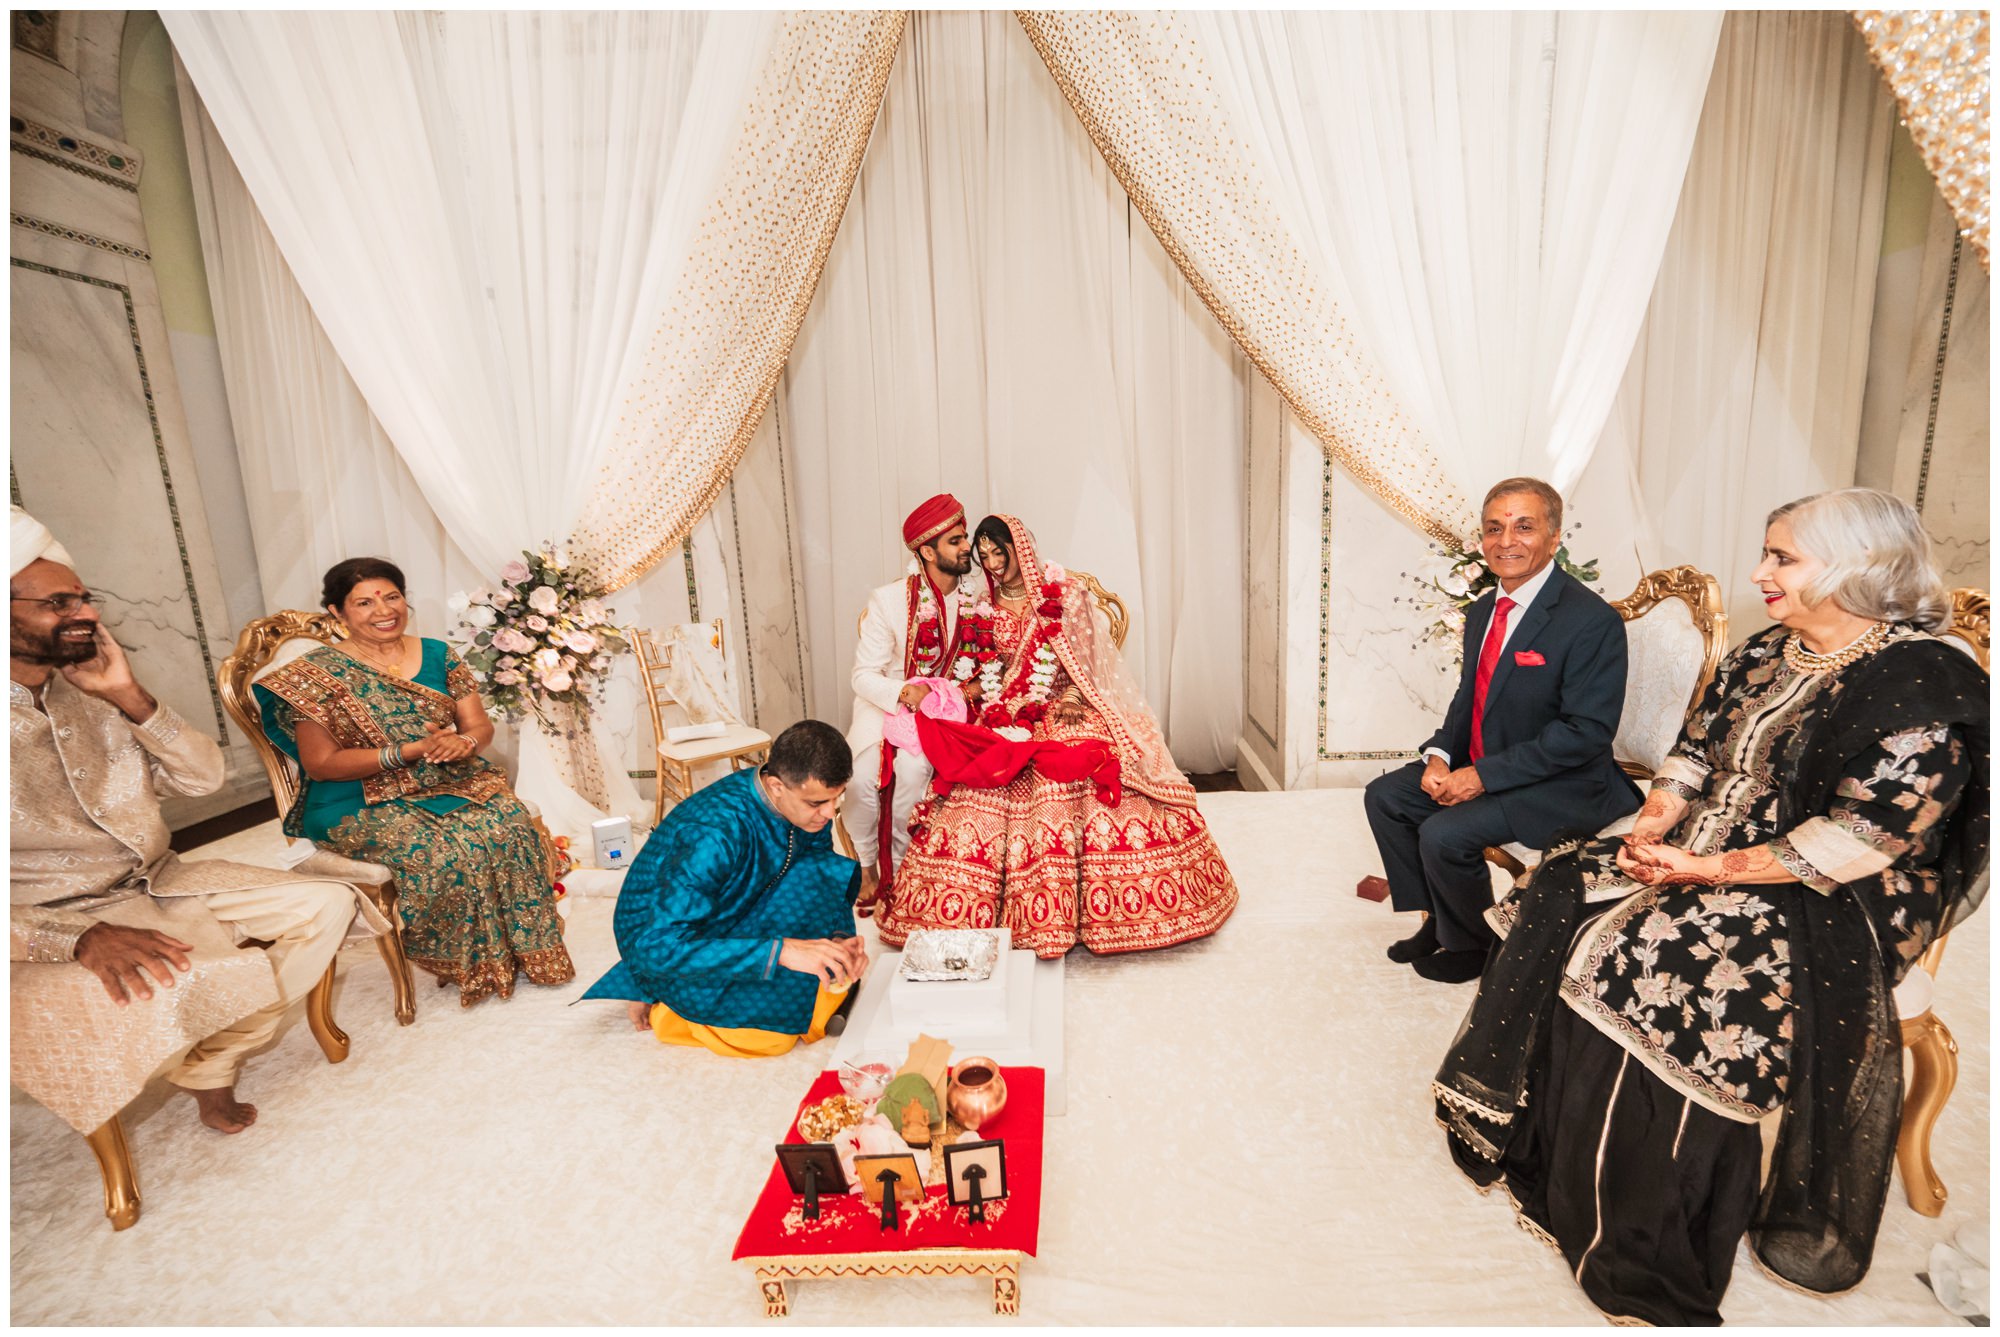 Indian wedding traditions